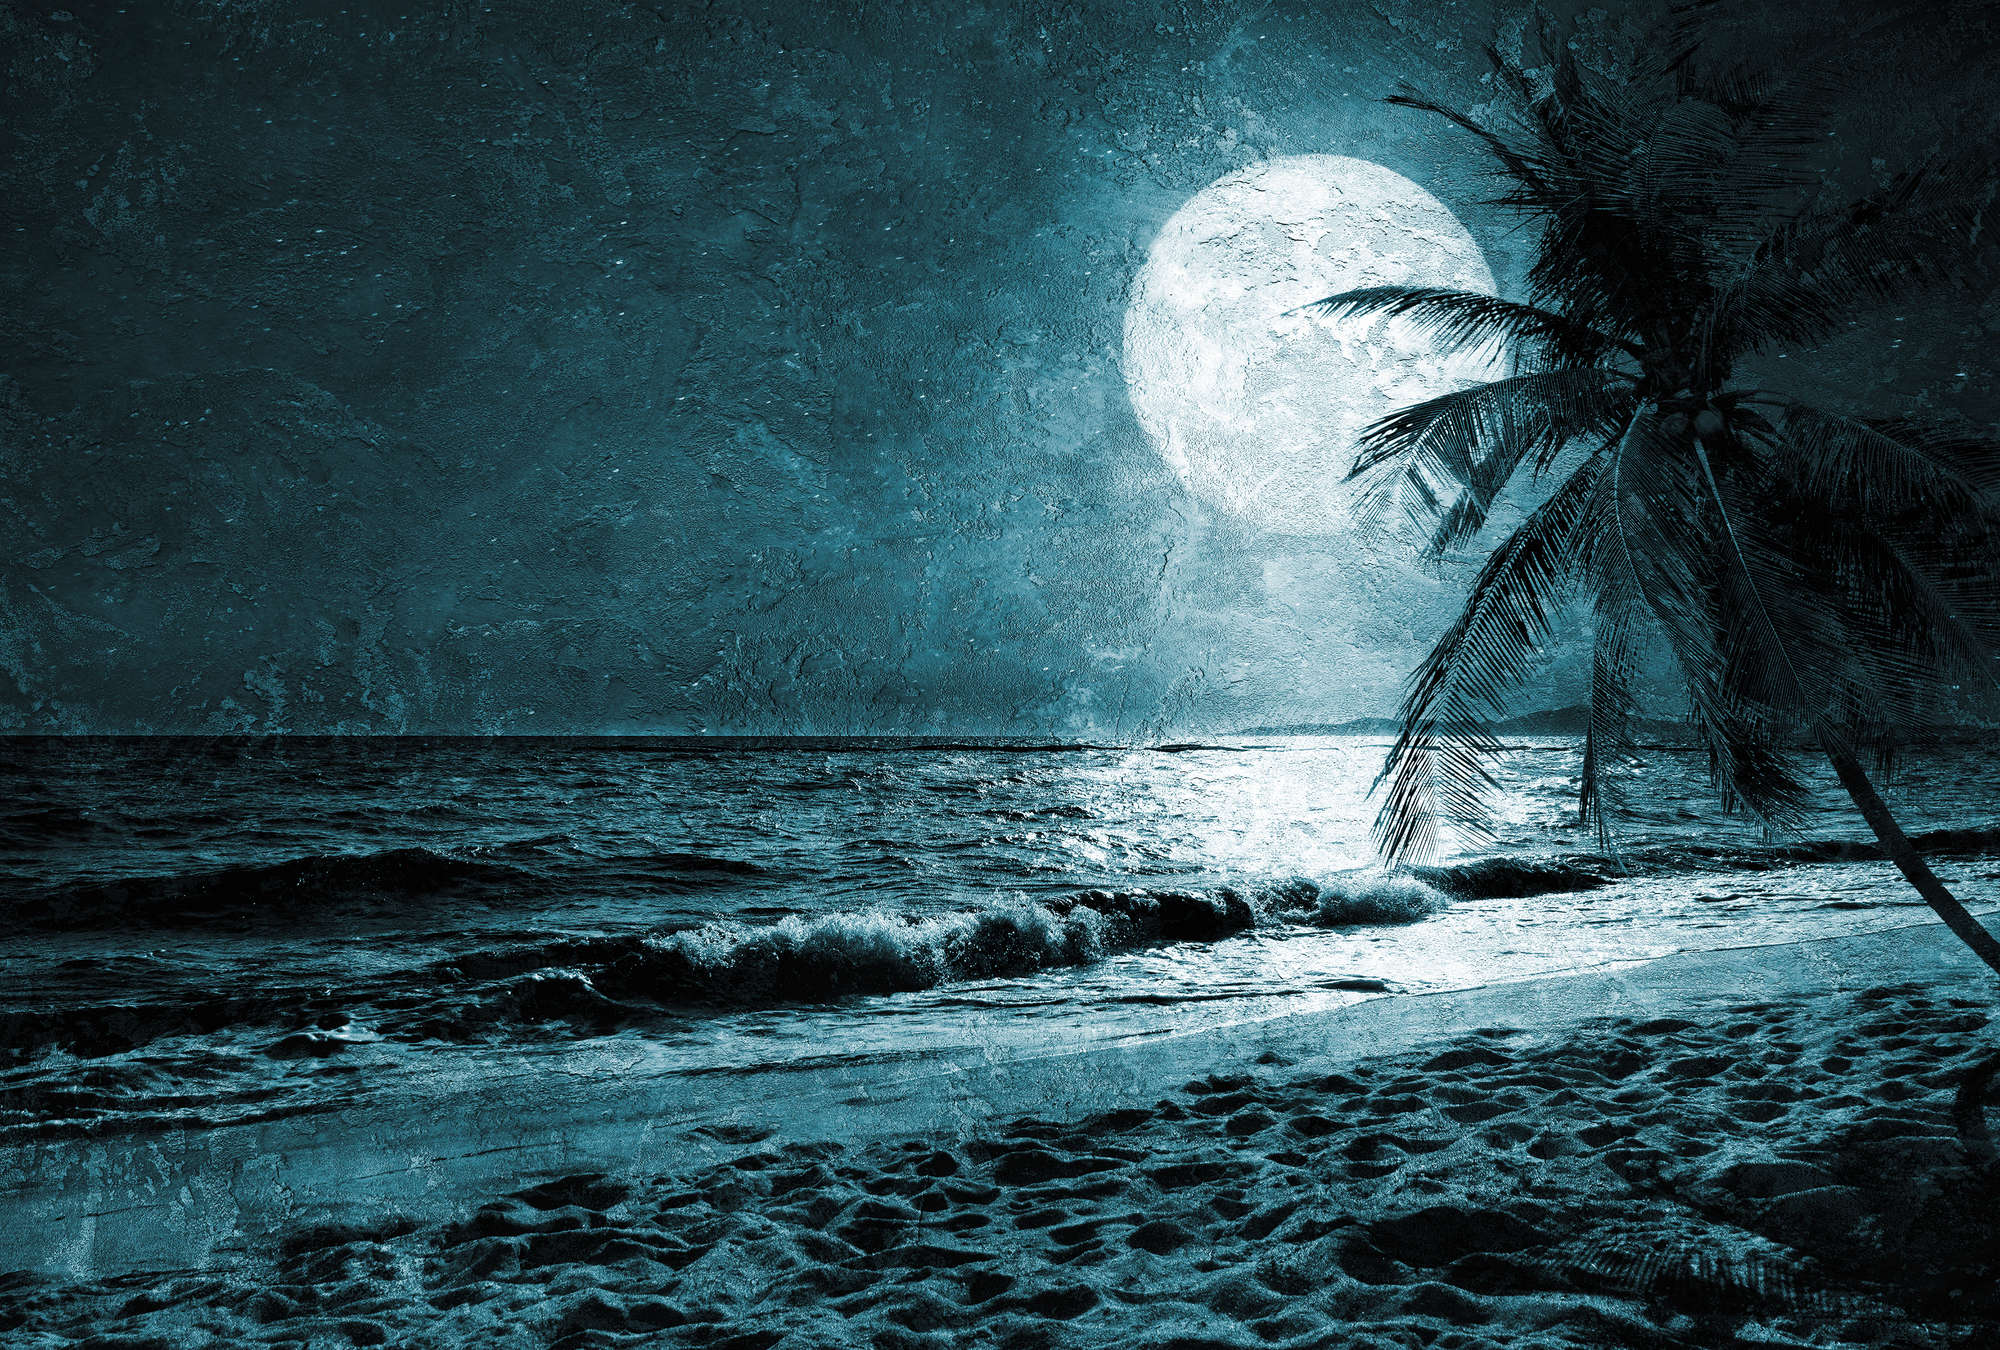             Beach mural with palm trees & sea at night - blue, white, black
        